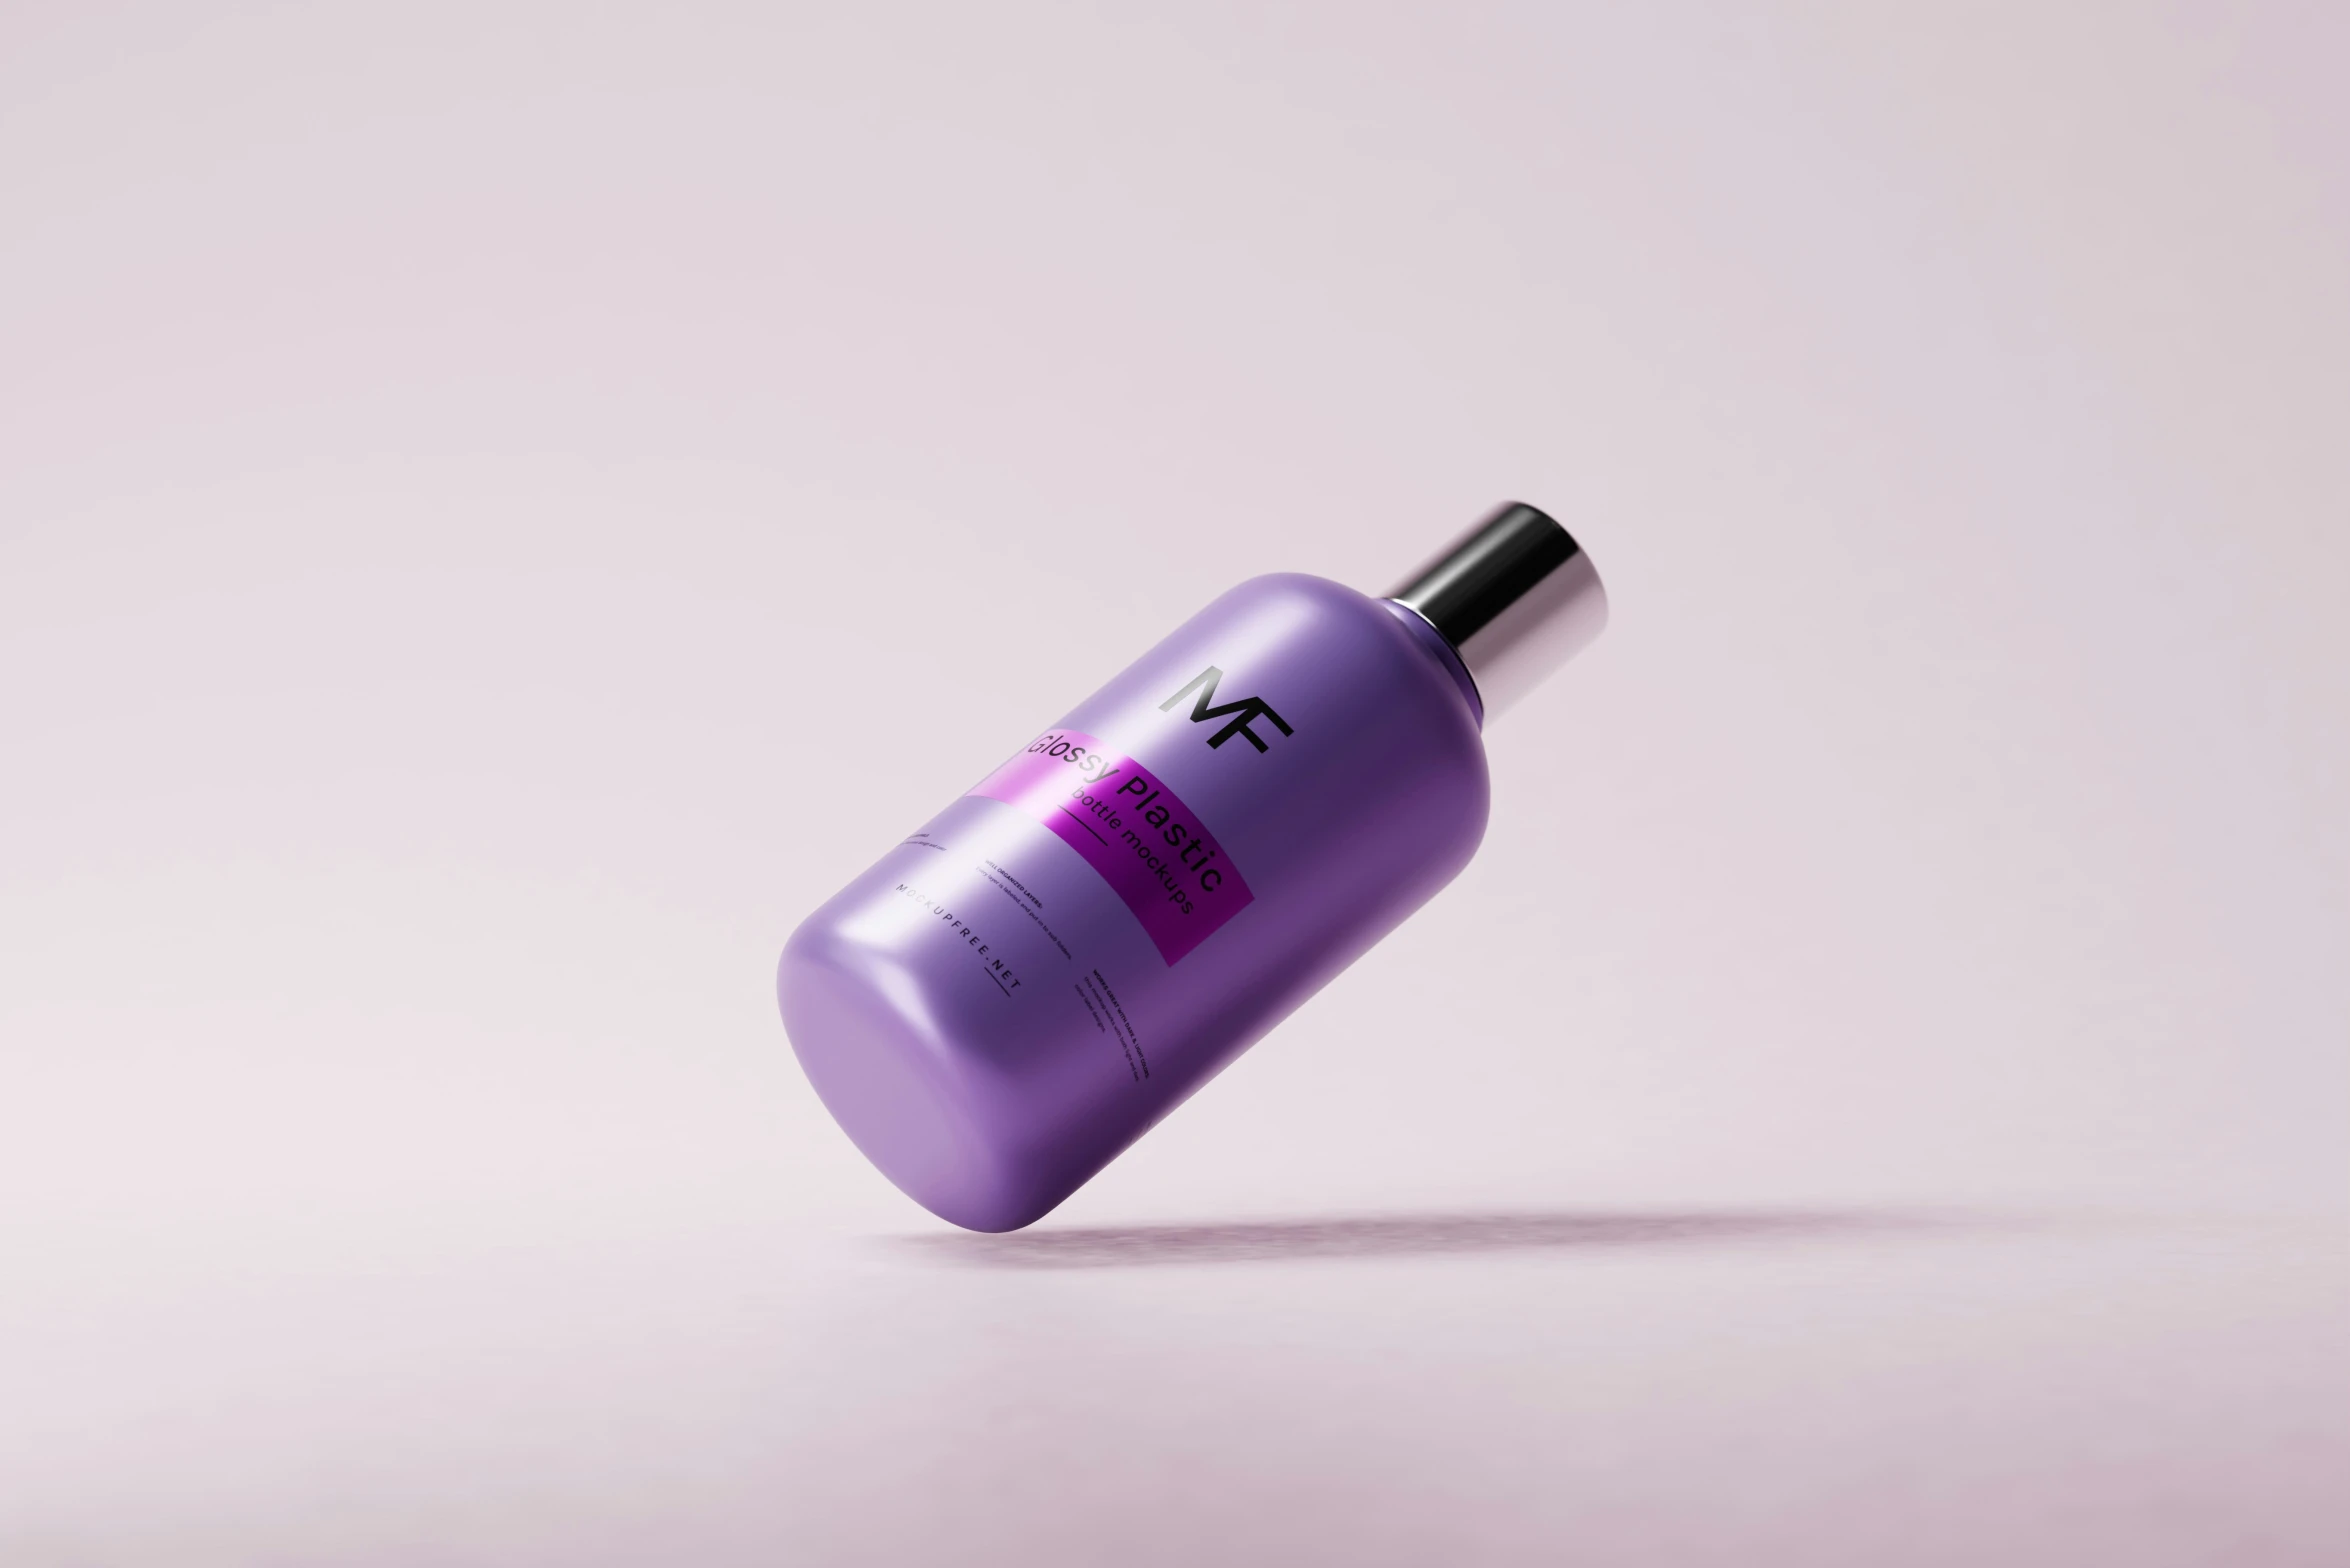 a bottle of hair products with a white and purple design